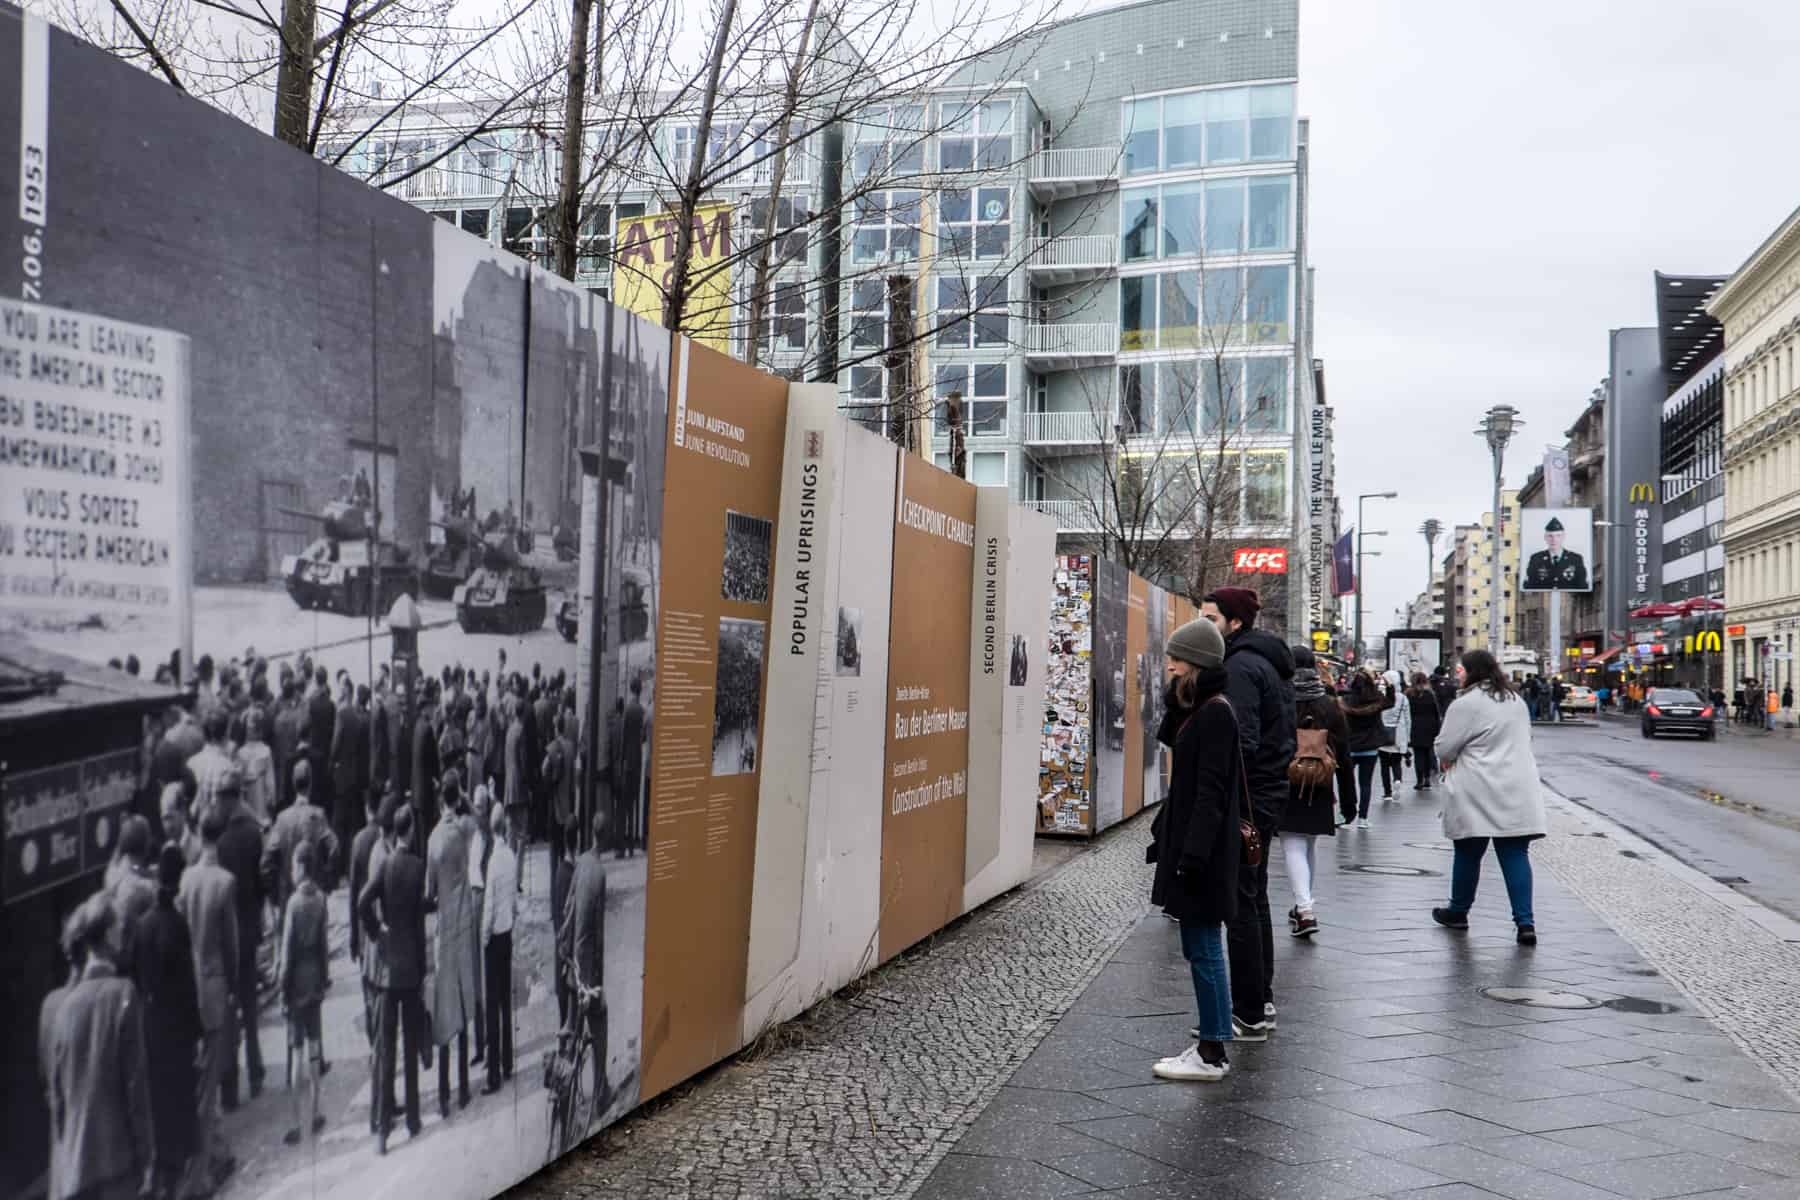 People stand in the street reading large orange and white history information boards about the Berlin Wall and the Cold War